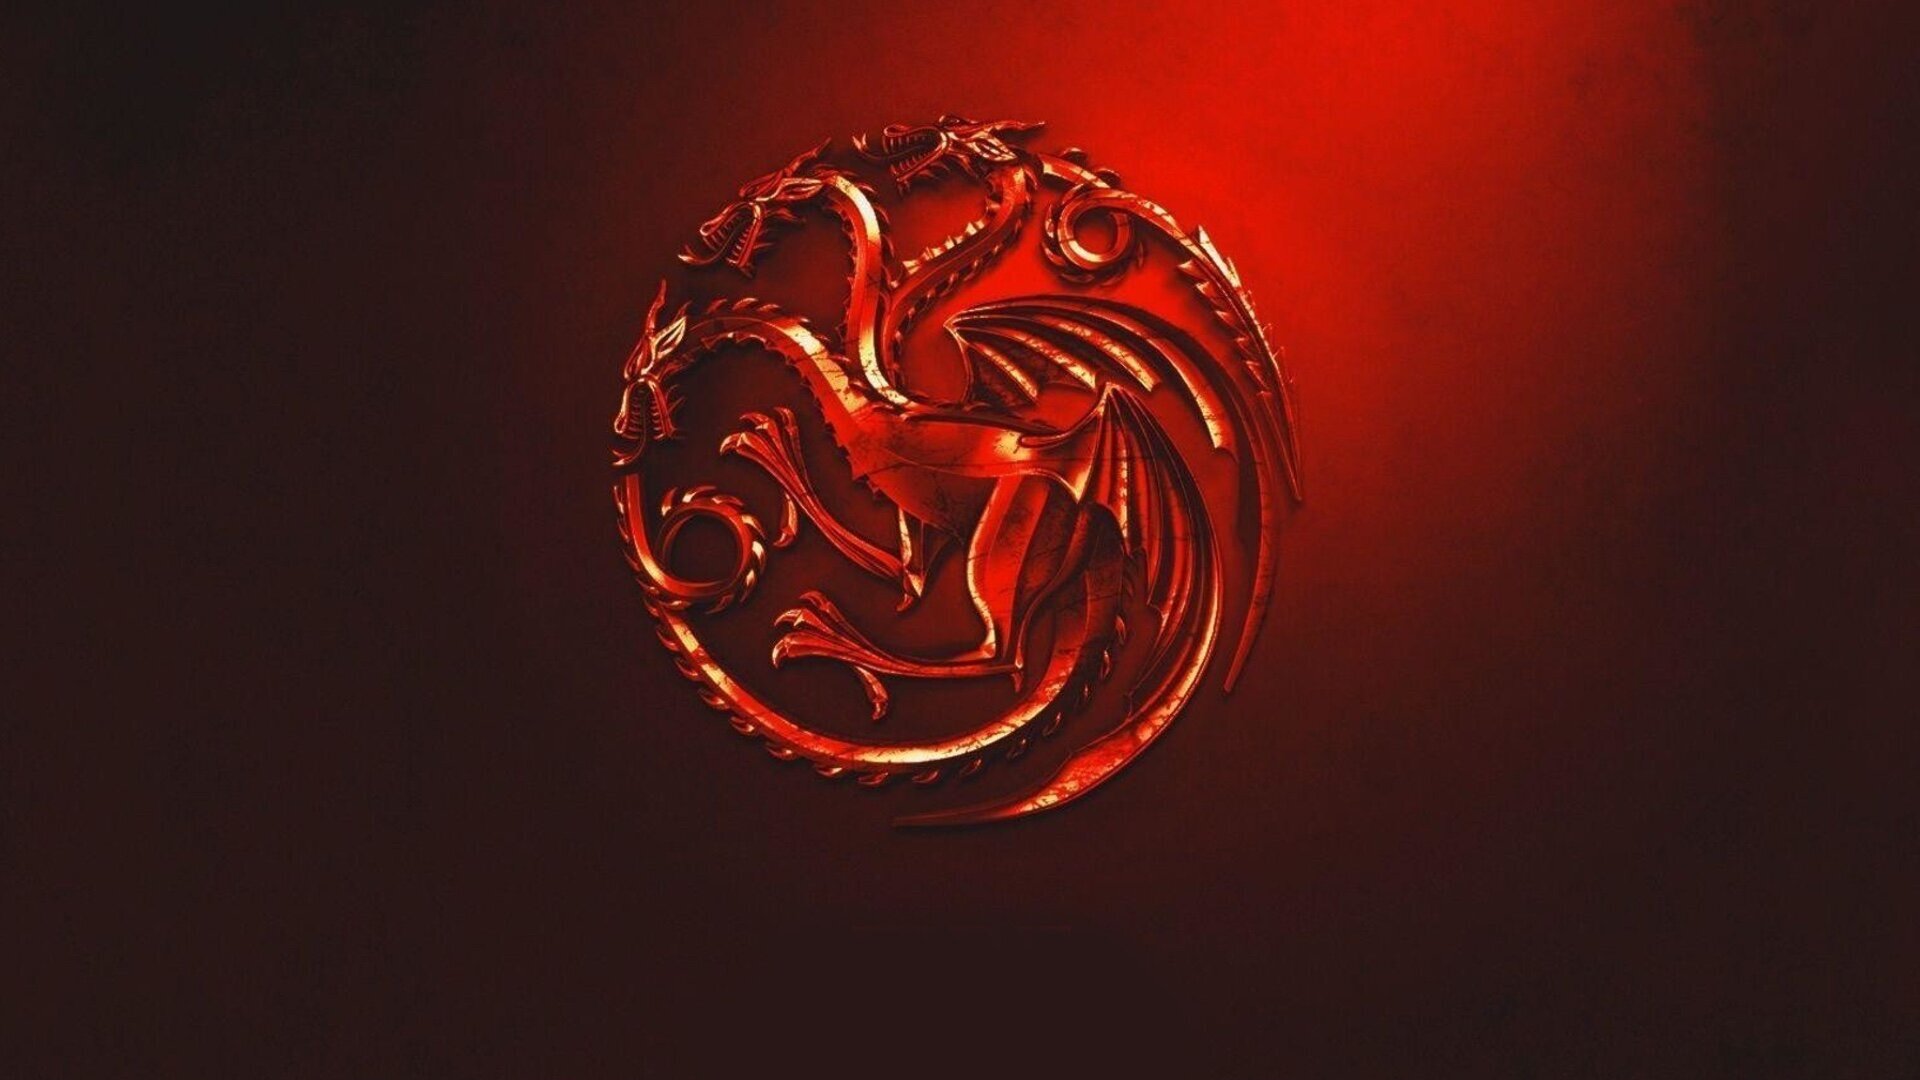 HBO Greenlights GAME OF THRONES Spinoff Series HOUSE OF THE DRAGON